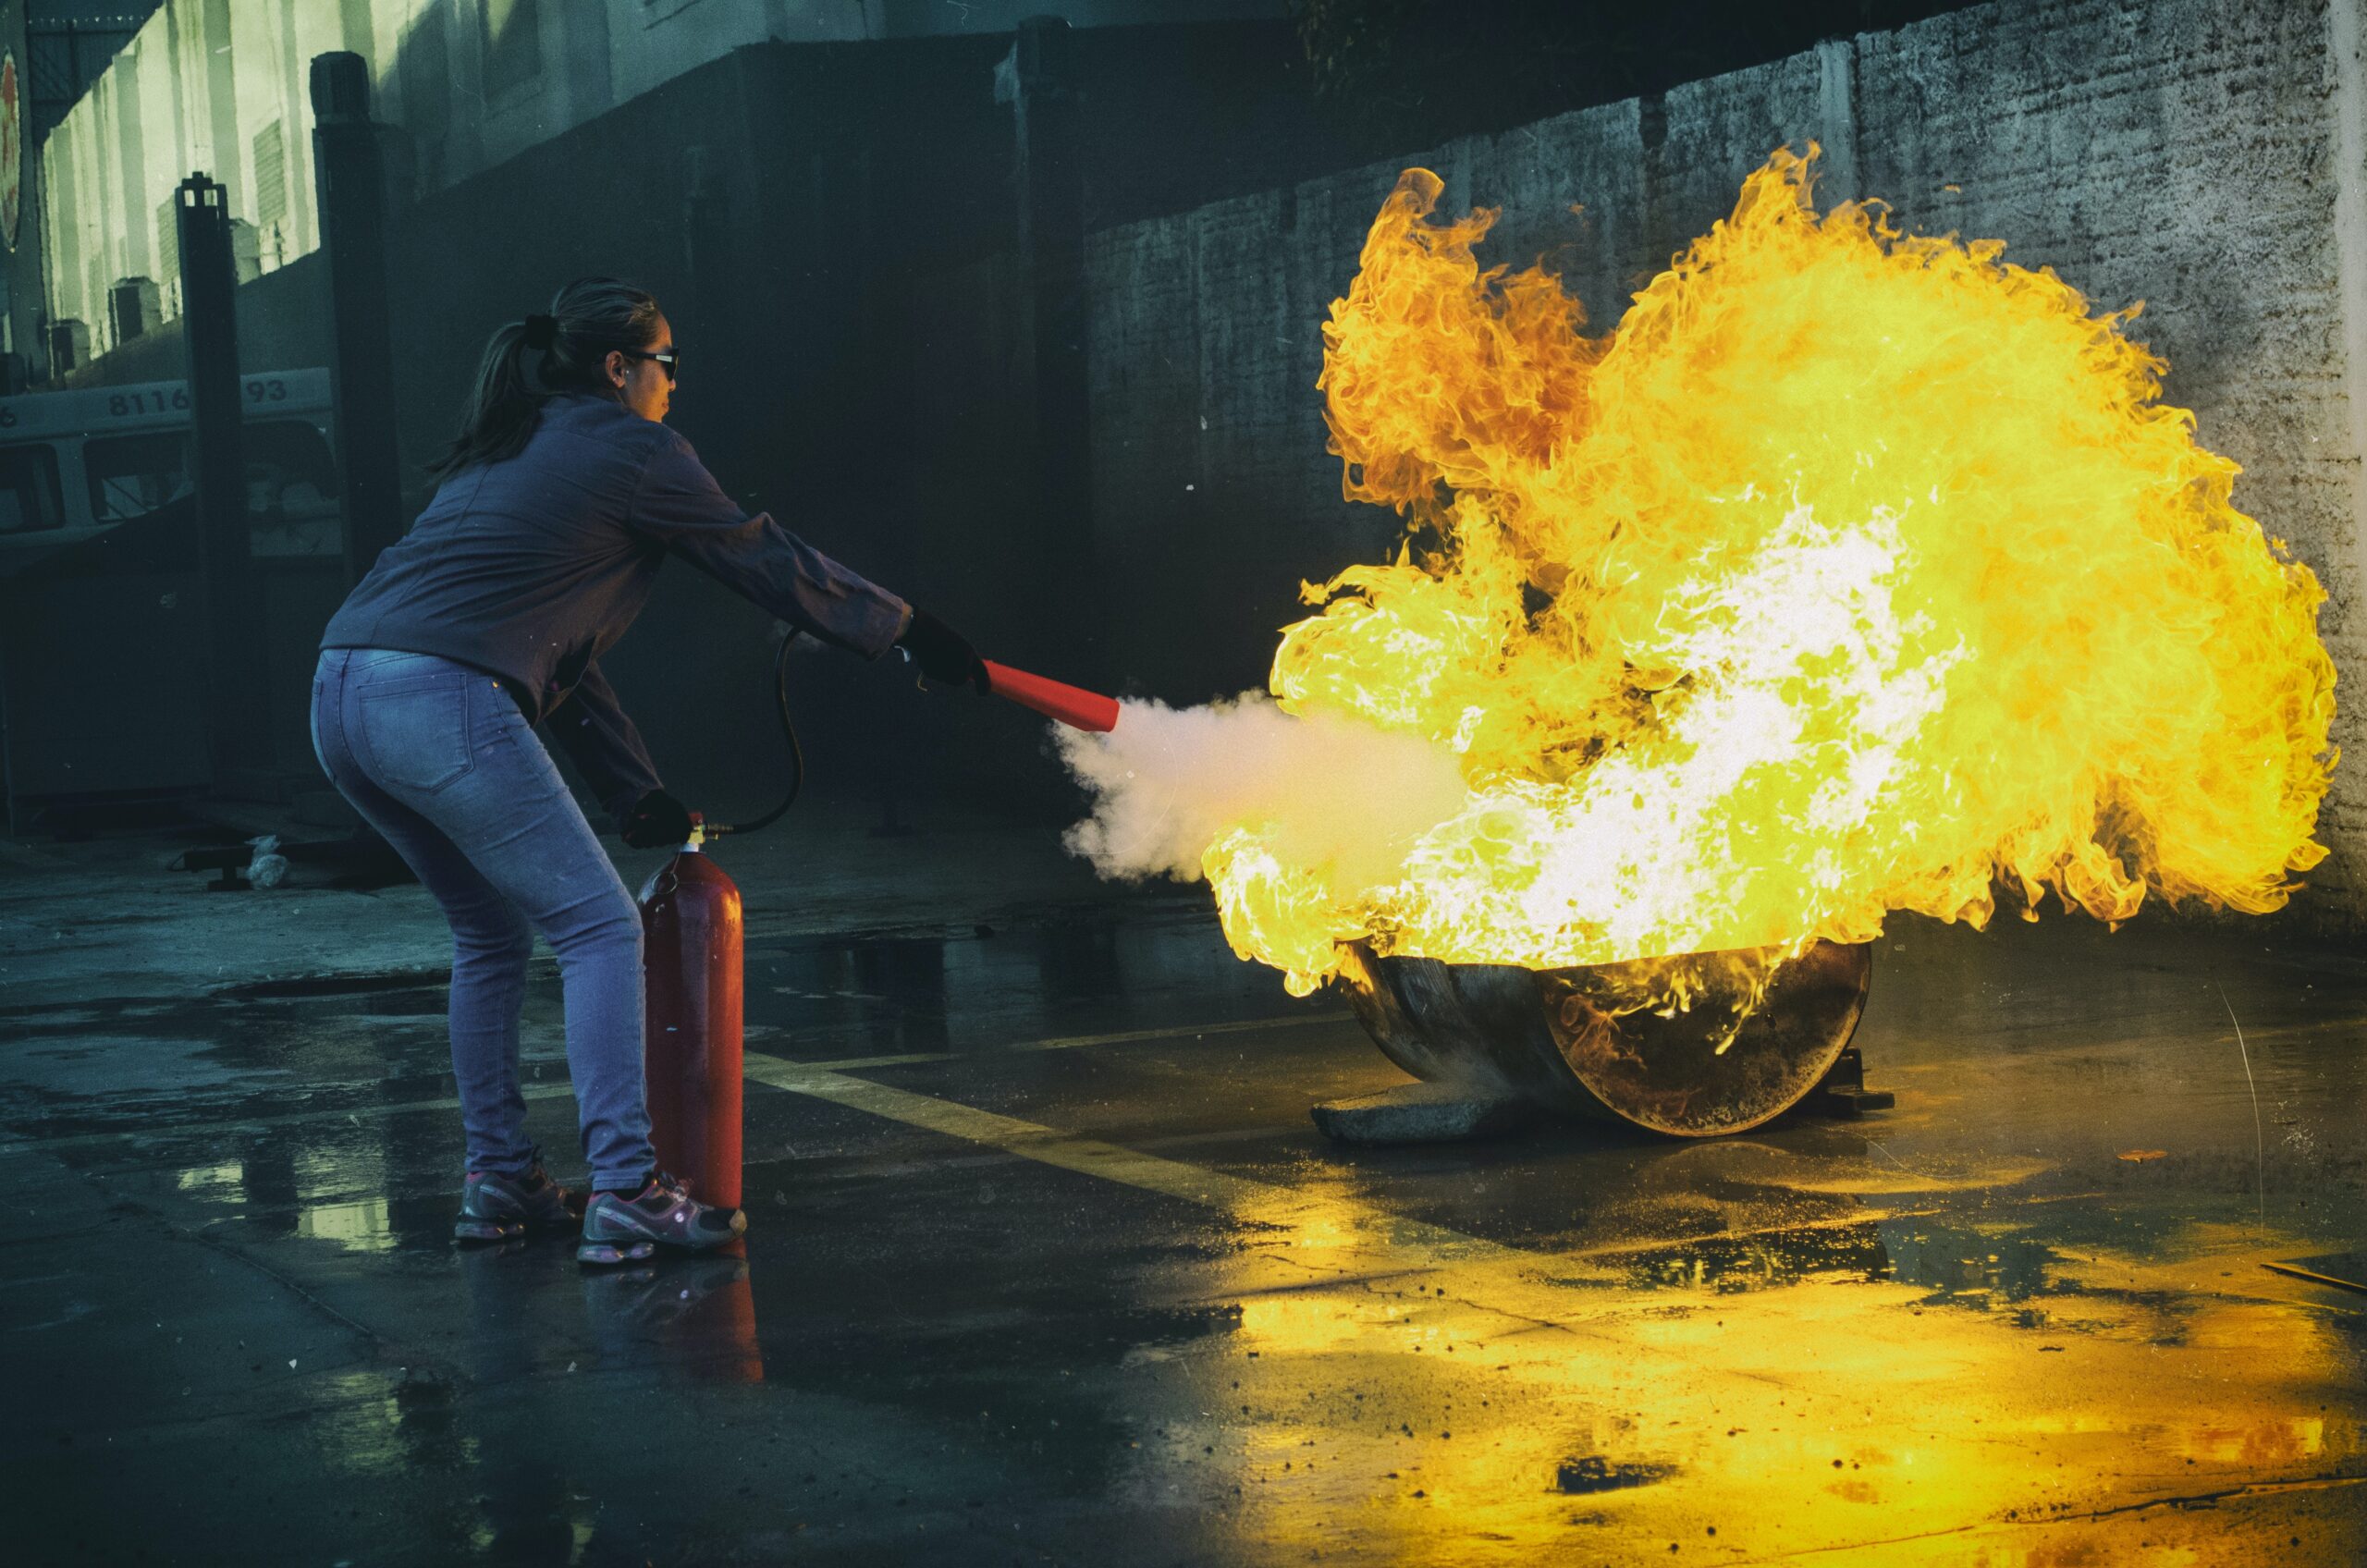 woman putting out fire with an extinguisher